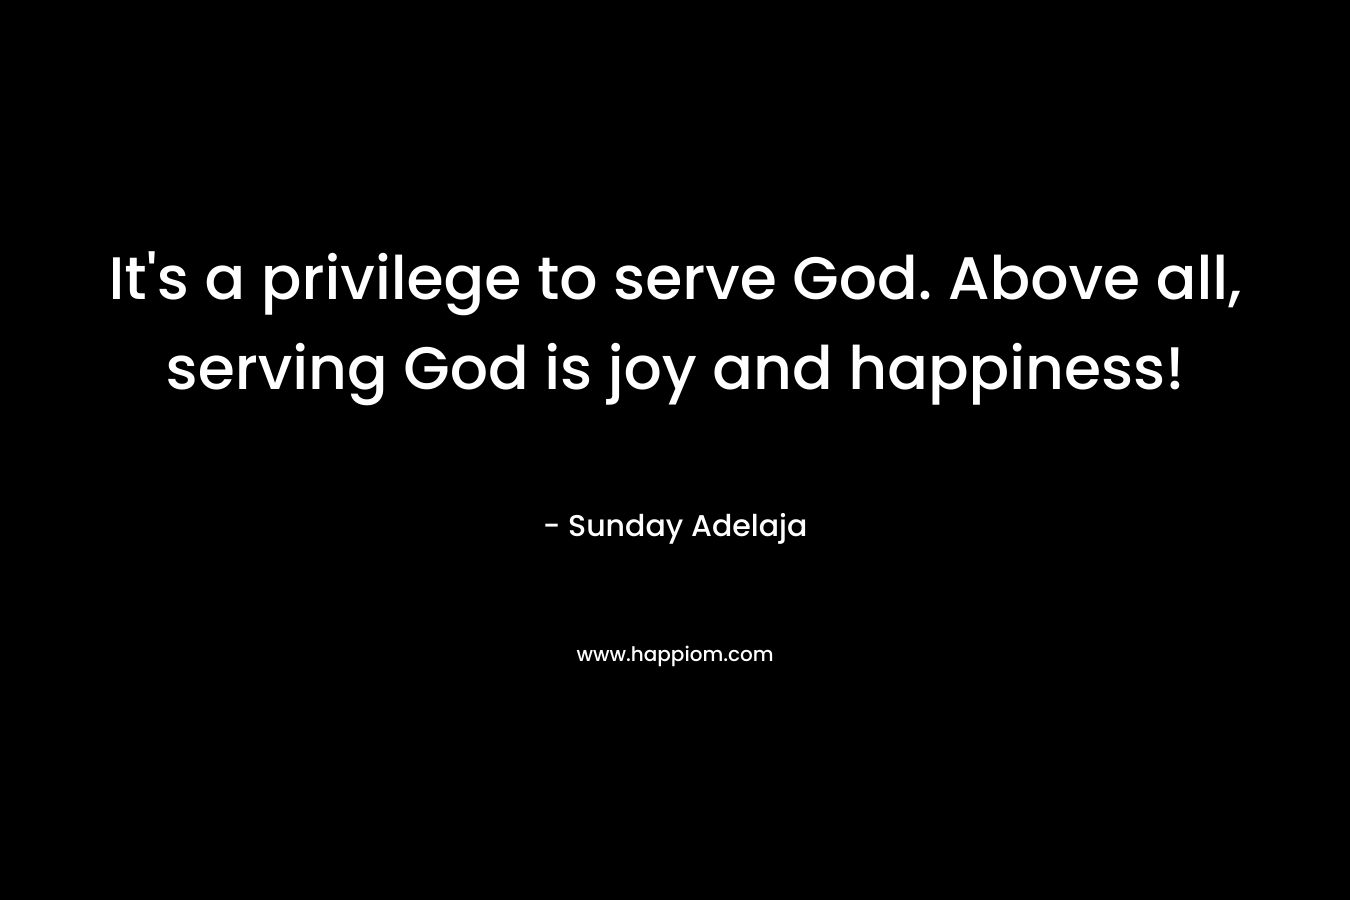 It's a privilege to serve God. Above all, serving God is joy and happiness!